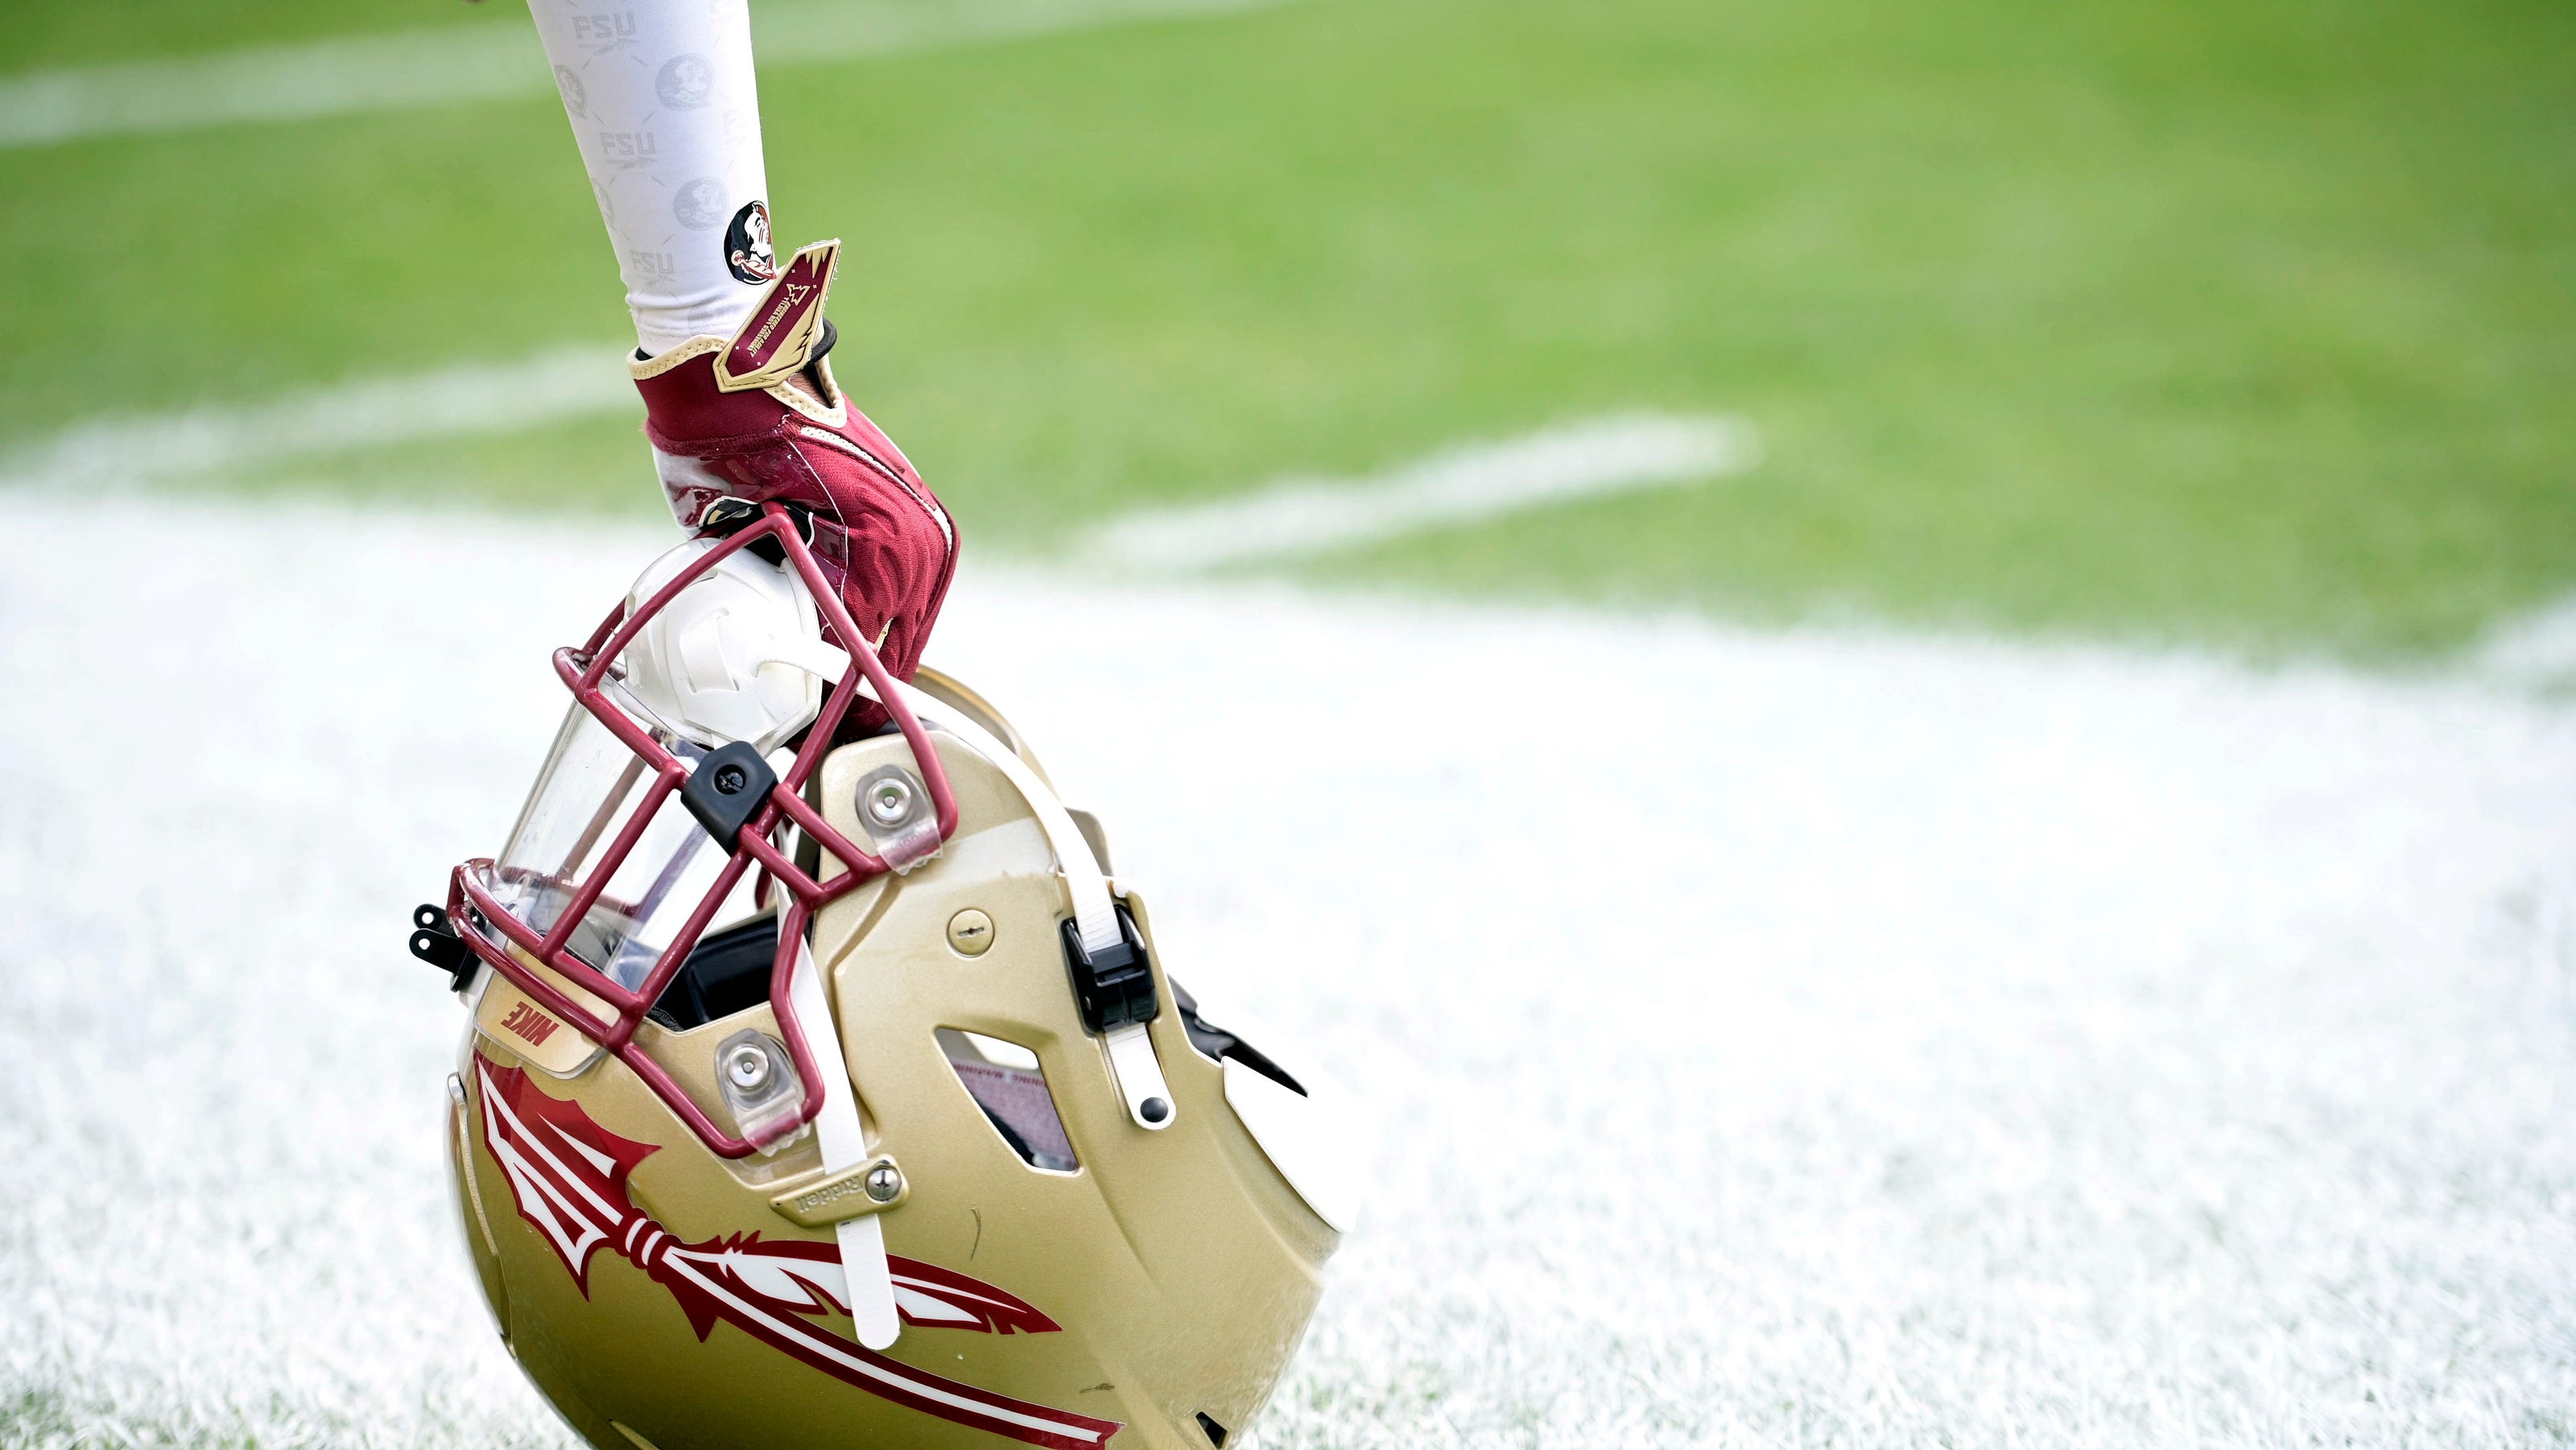  Mediation and more: Key takeaways as FSU's lawsuit against ACC hits a snag 